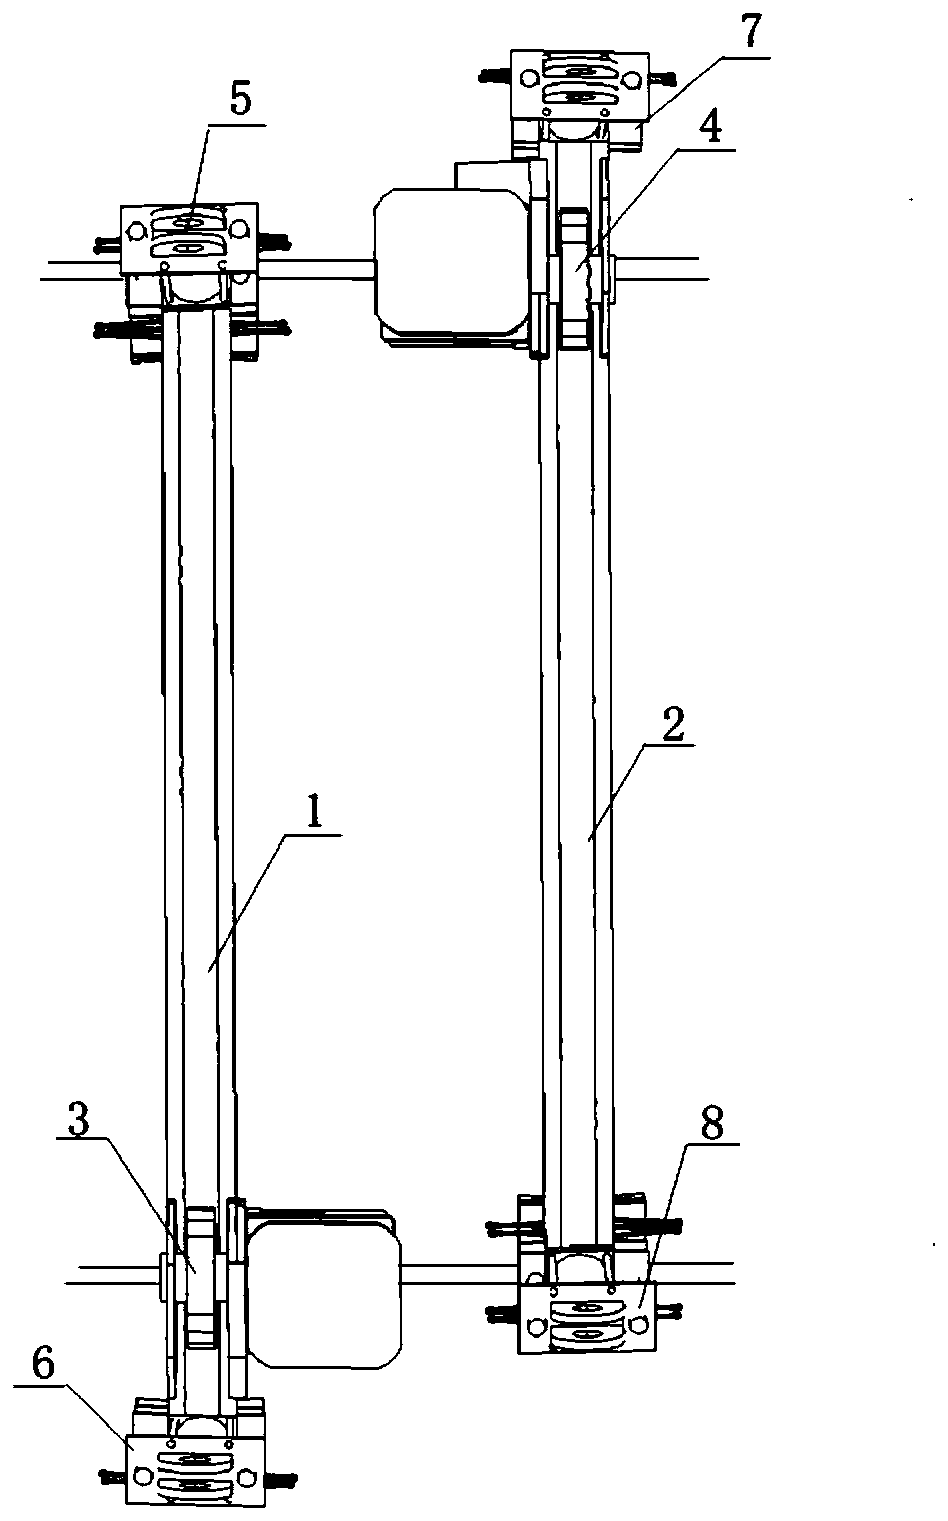 Tower mast structure lifting mechanism